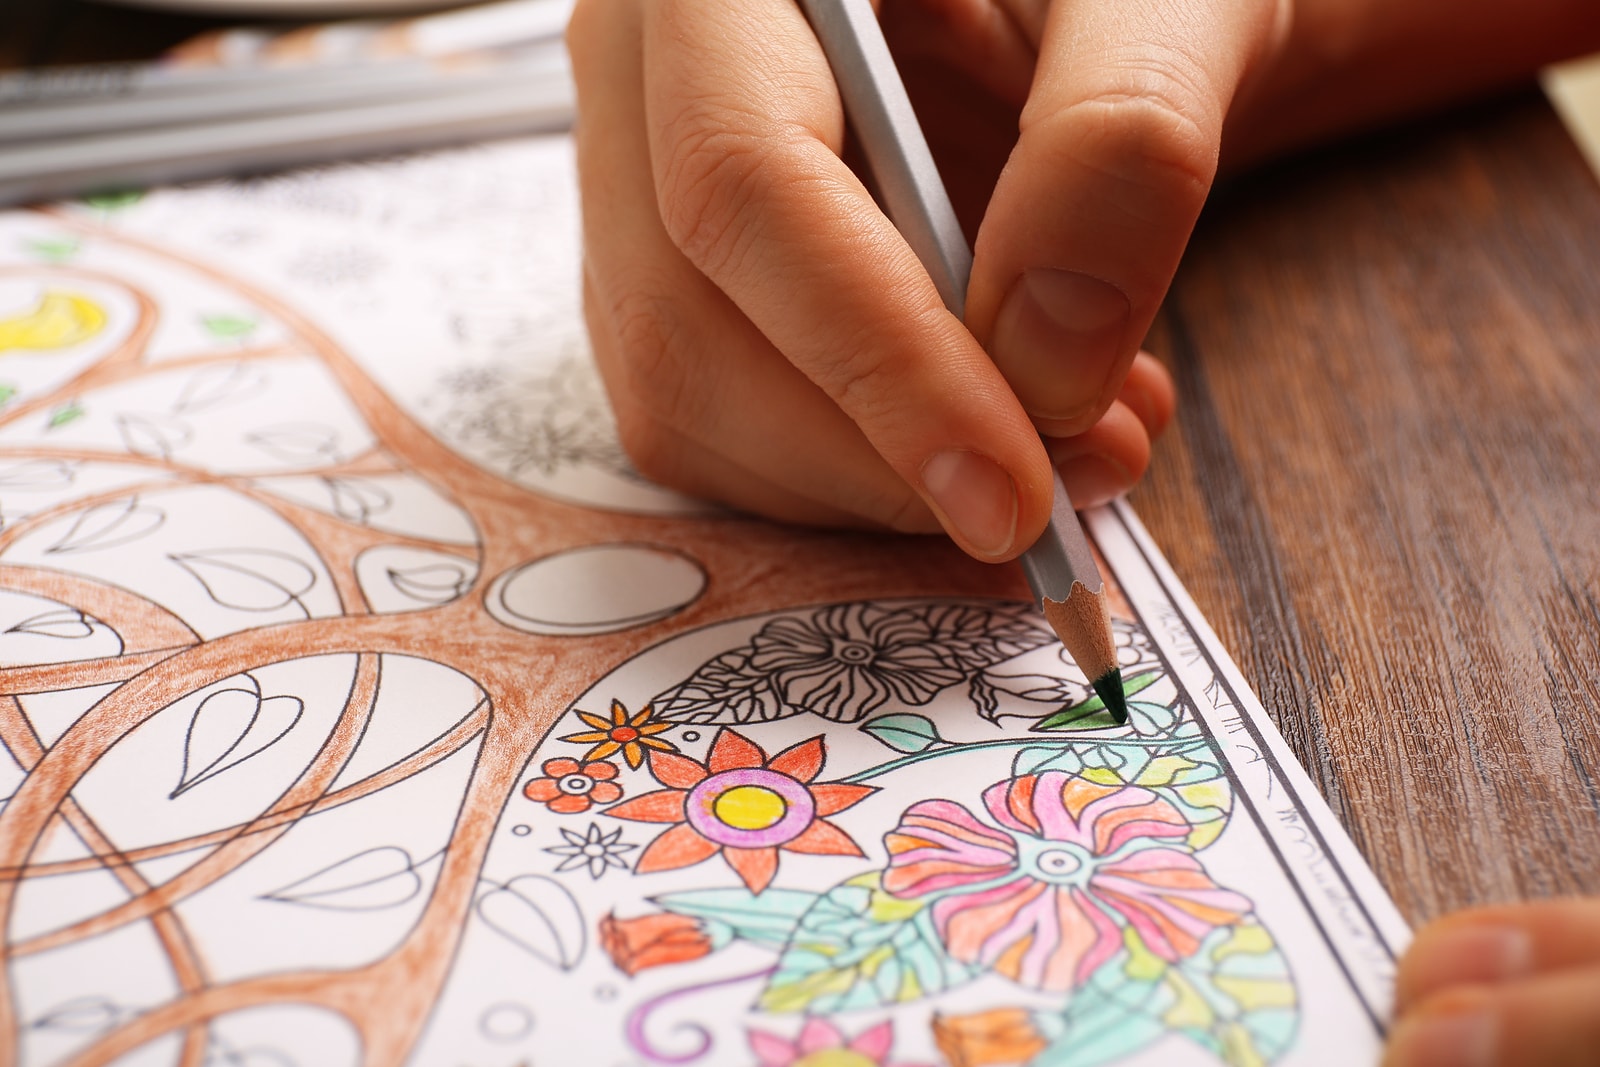 Adult Coloring Books for Mindfulness, Stress Relief & Emotional Wellbeing